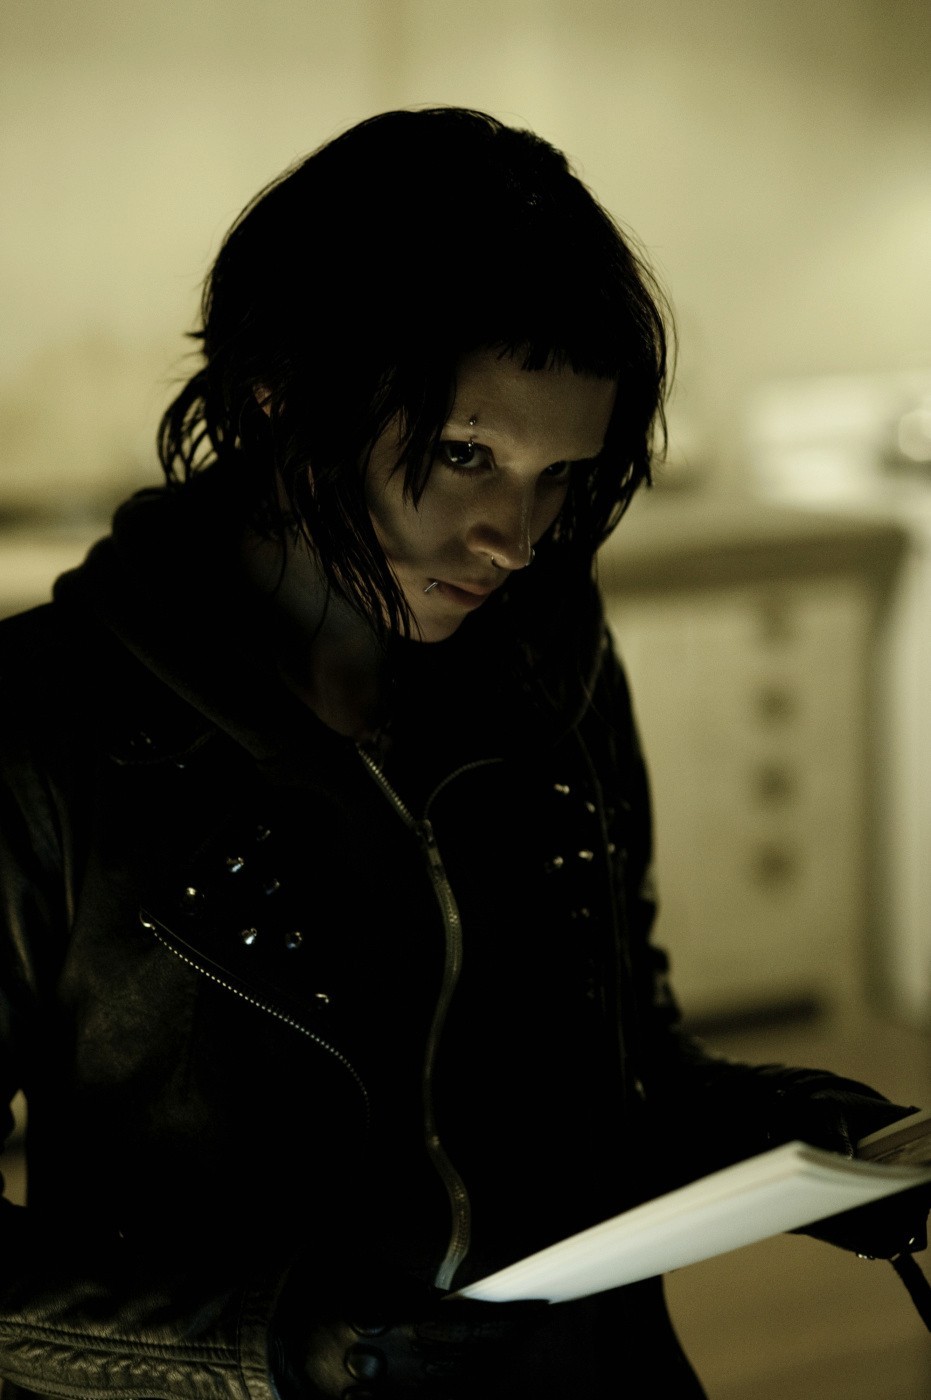 Movies: Pictures of The Girl With the Dragon Tattoo (2011)